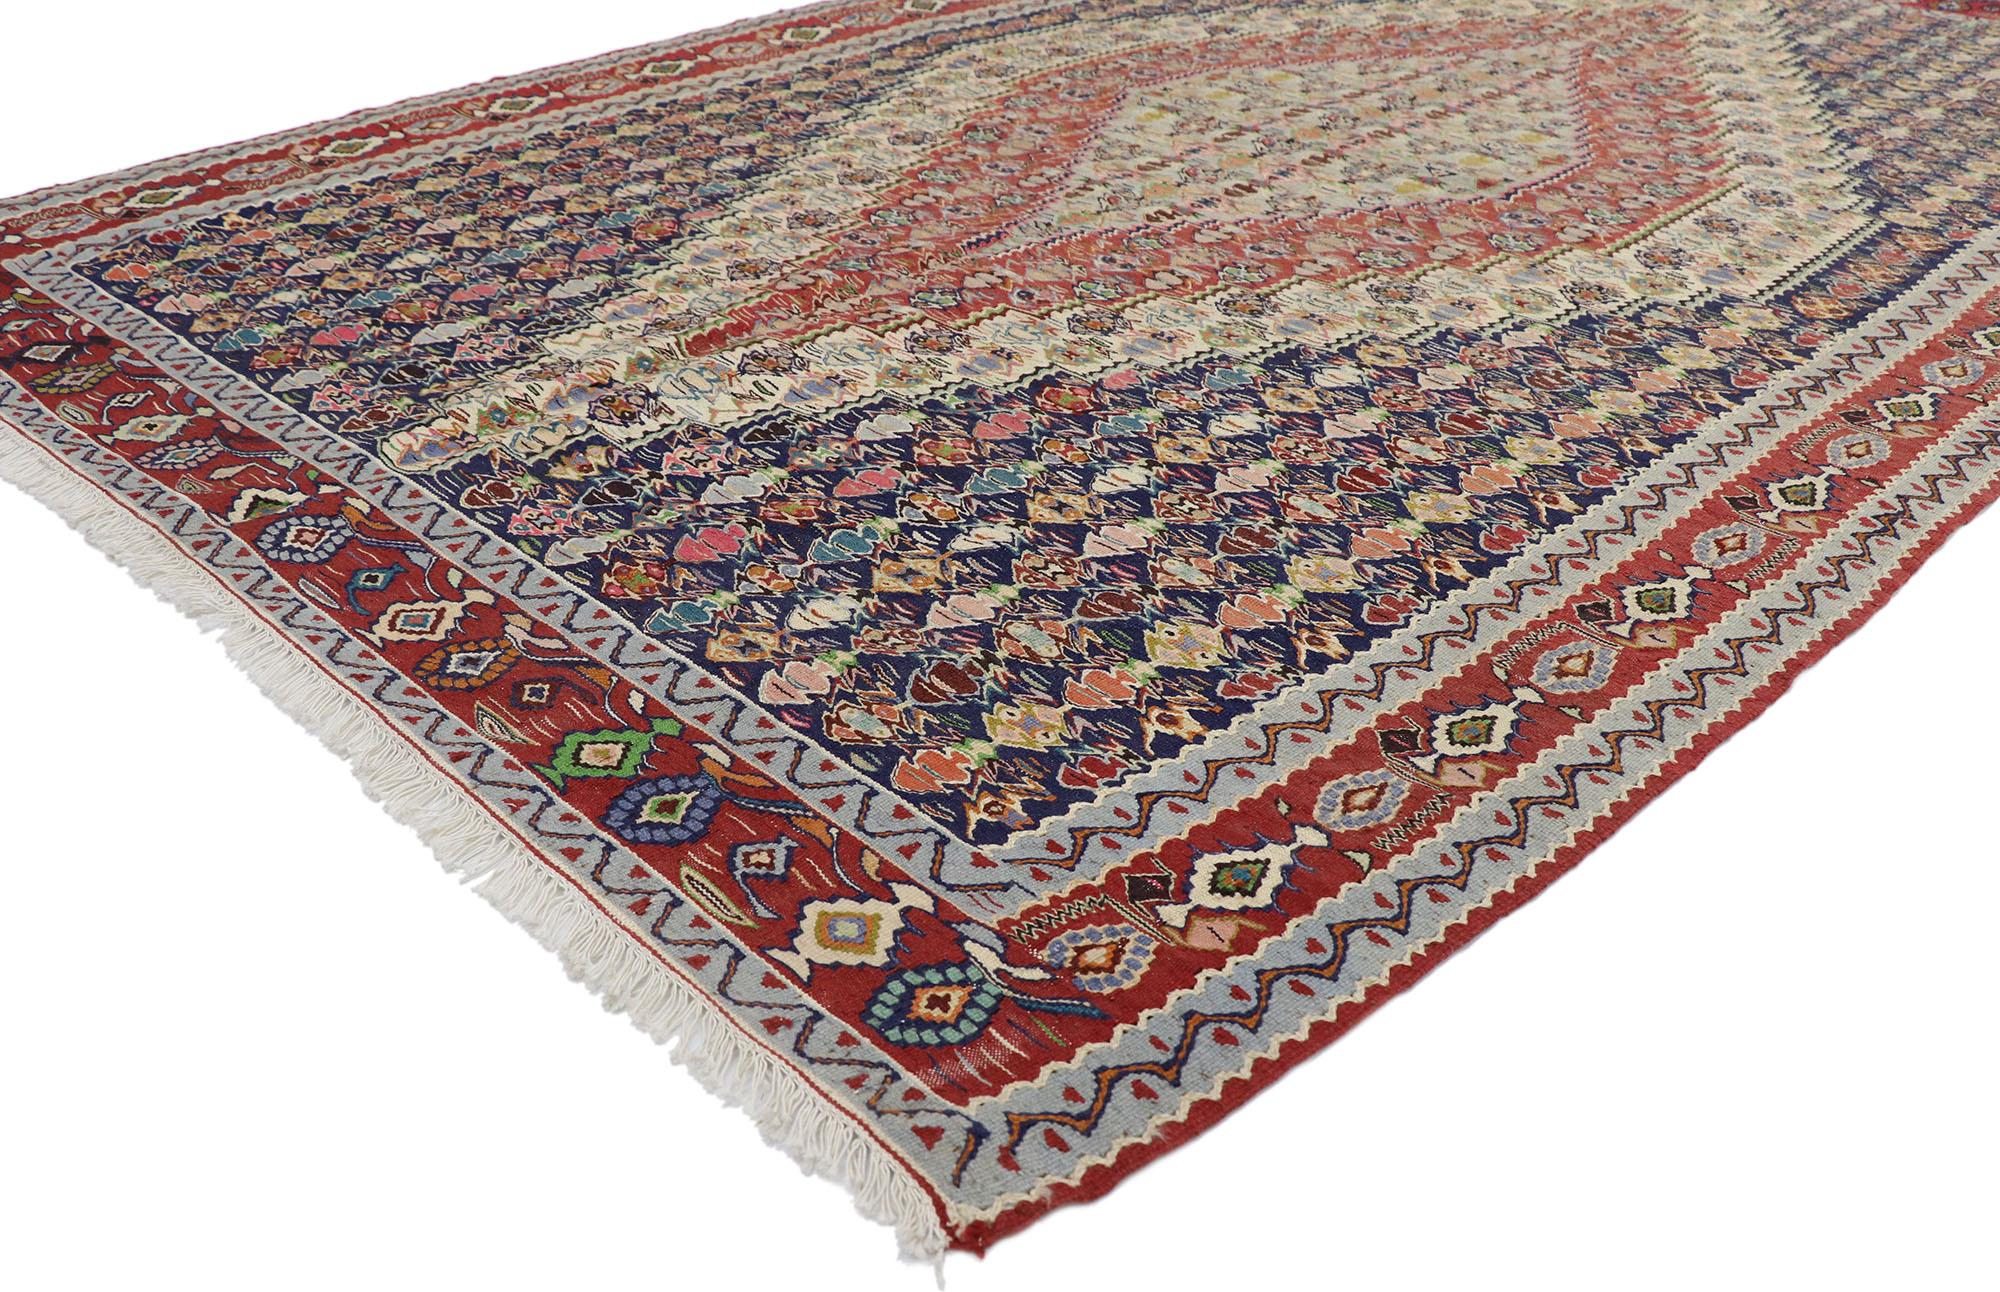 78052 Vintage Persian Senneh kilim rug with Farmhouse Cottage Style 05'03 x 08'01. Effortless beauty and simplicity, this hand-woven wool vintage Persian Senneh kilim rug gives a lively and light hearted feel with its bucolic charm. The abrashed